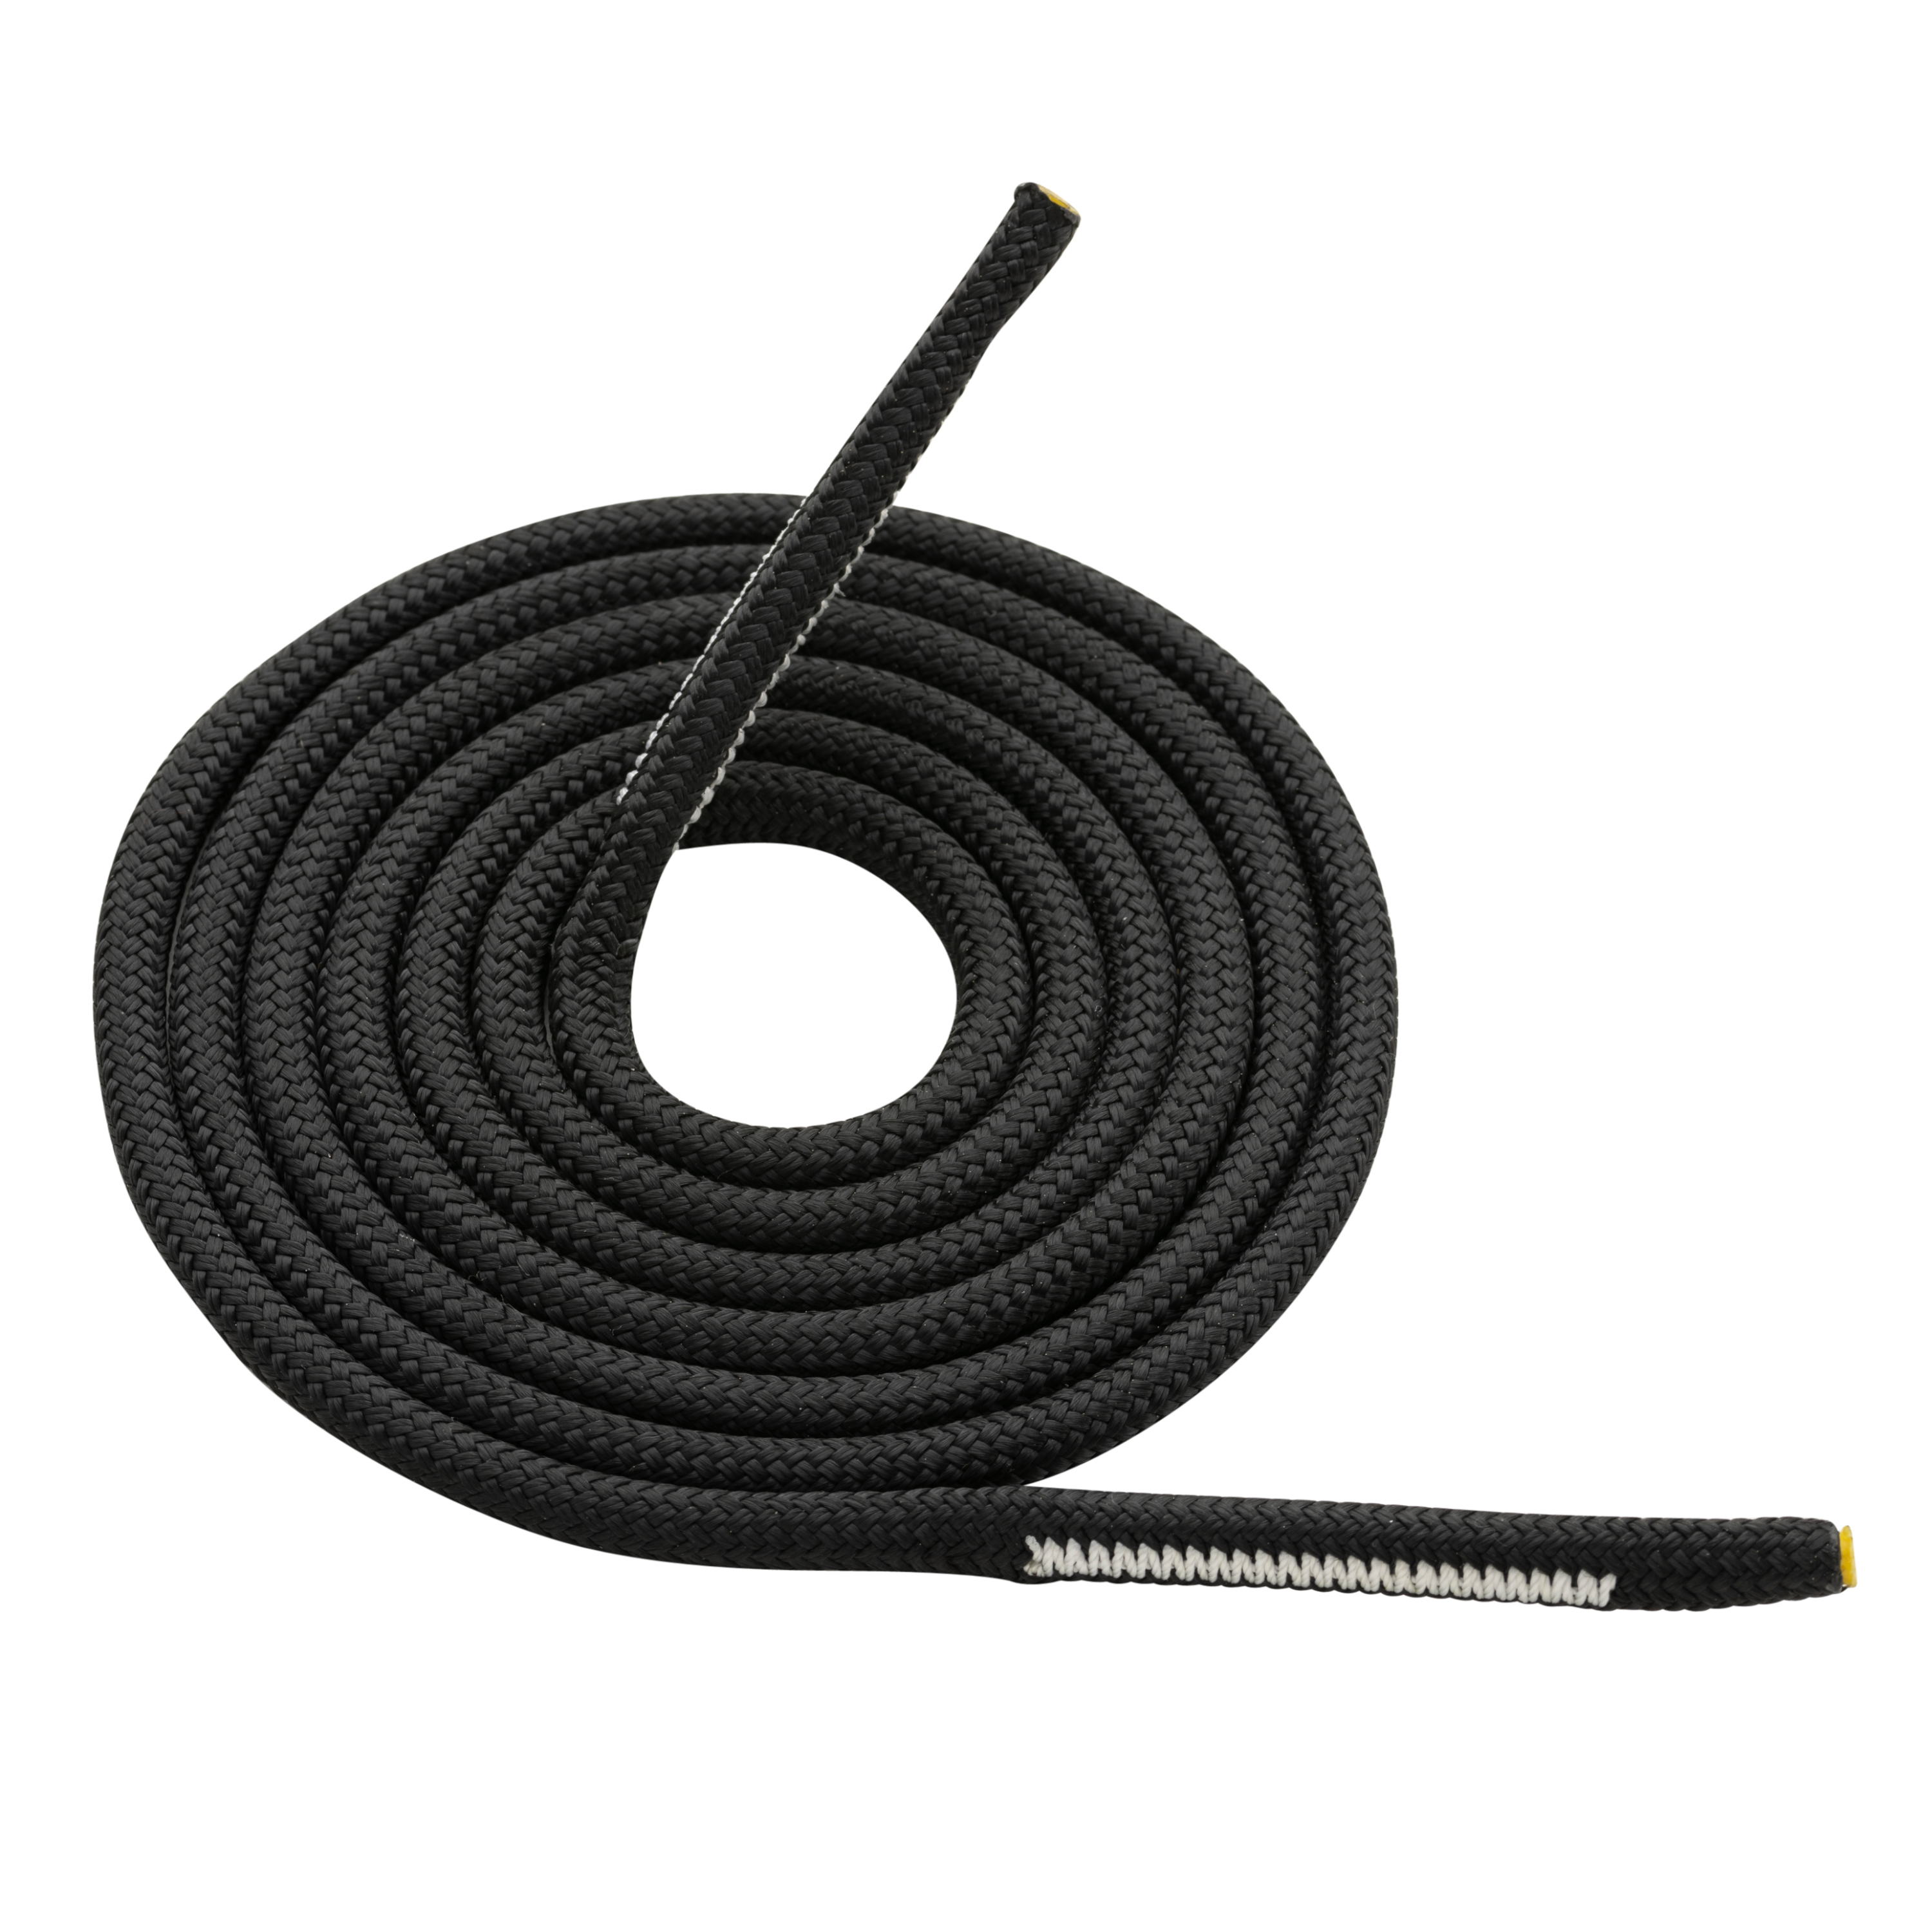 DYNA.MIT cord with dyneema core